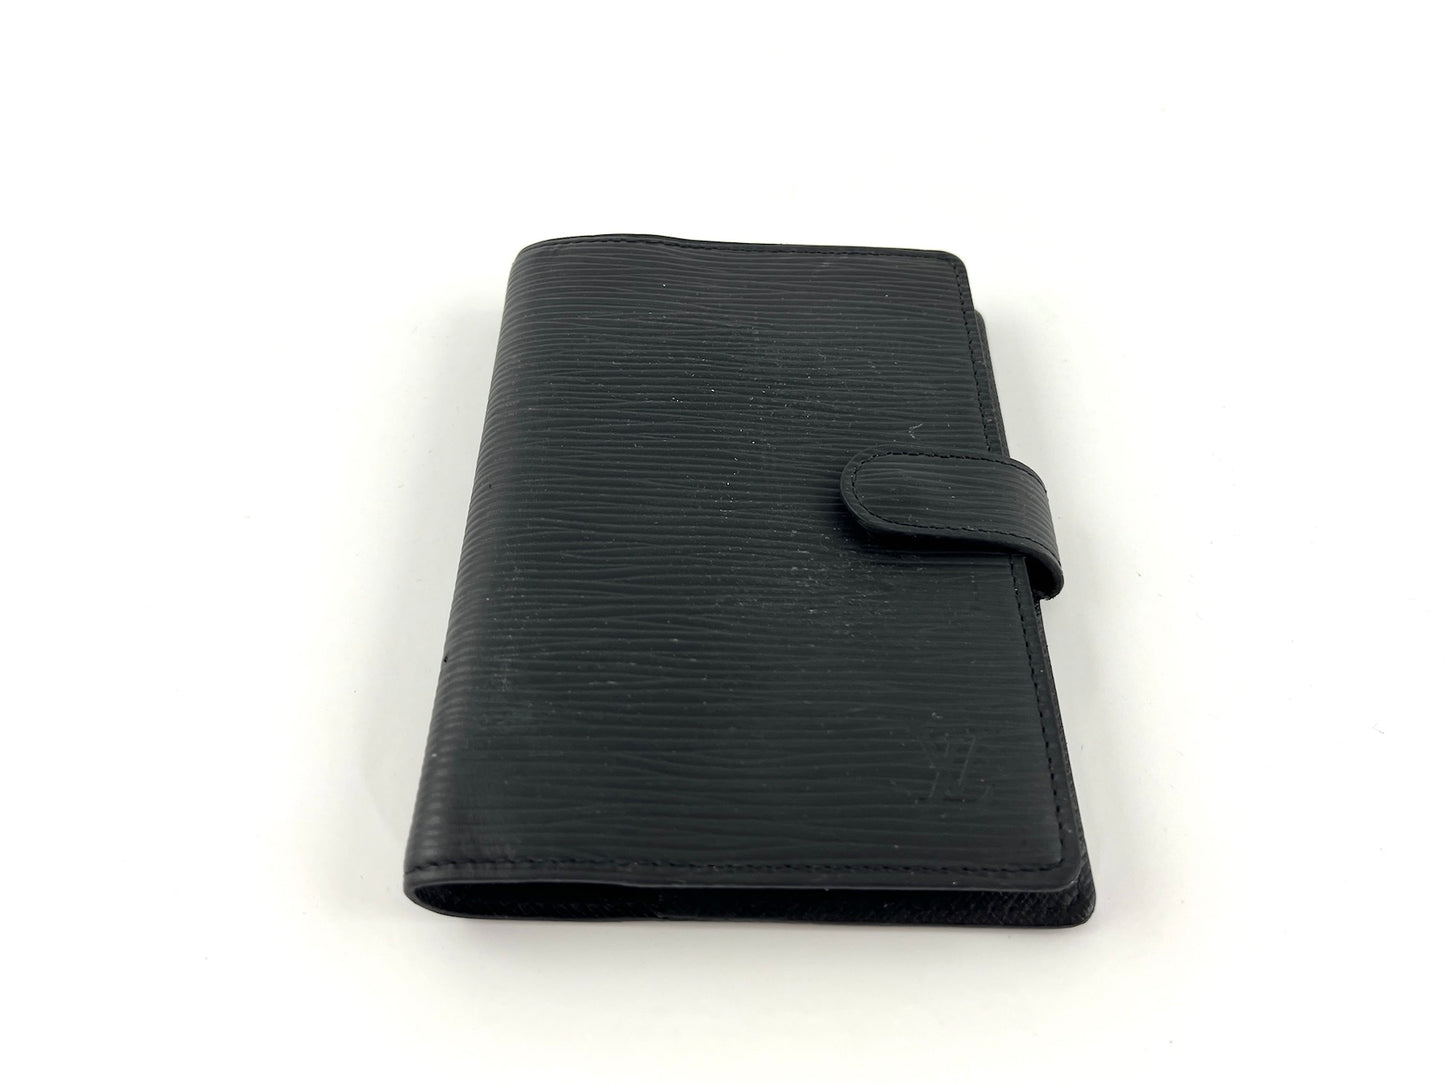 LOUIS VUITTON Black Epi Leather Small Ring Agenda Planner Cover